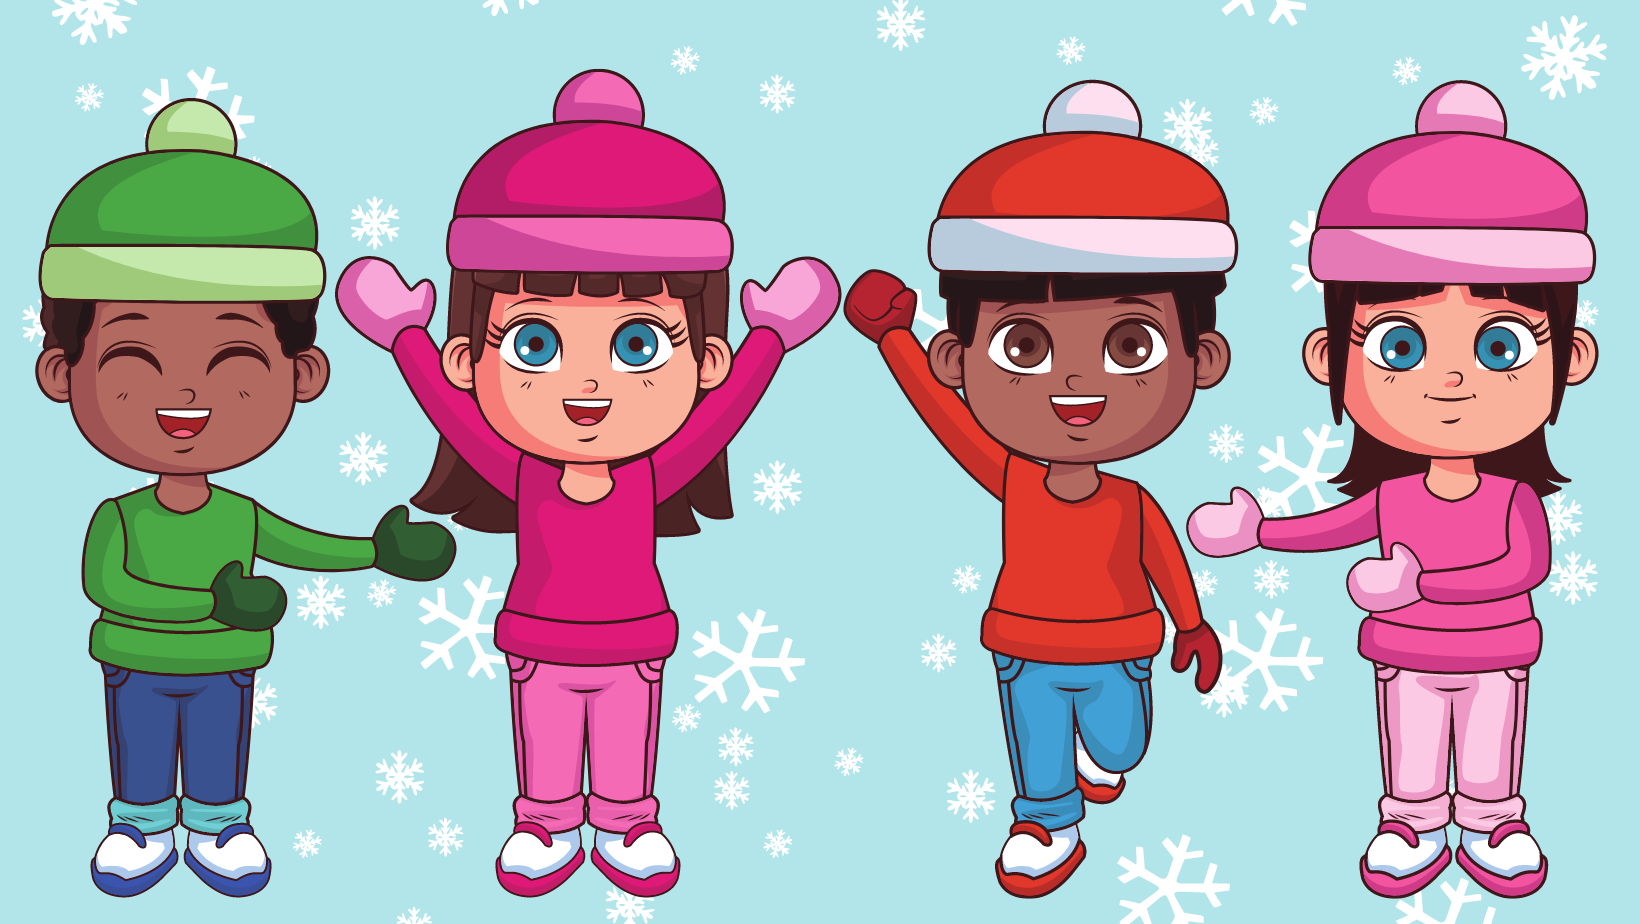 graphic of four children in winter clothes